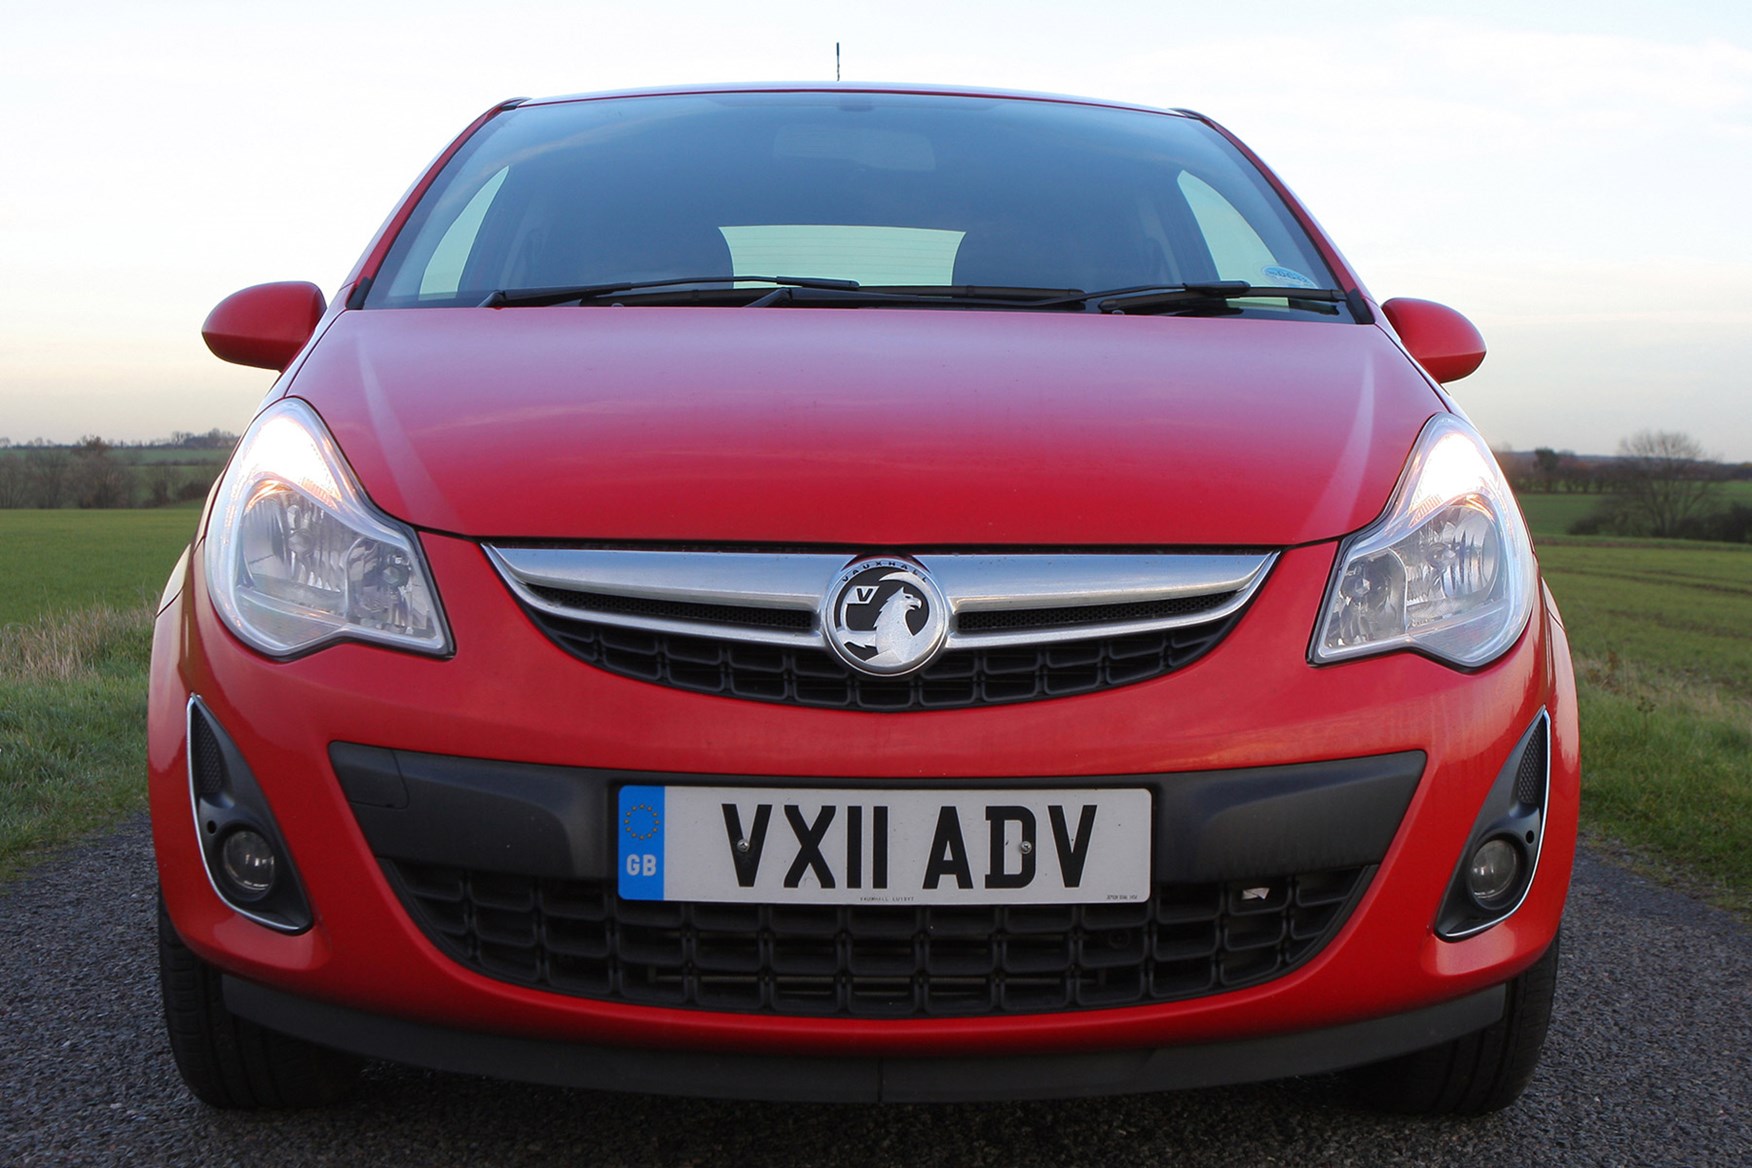 Vauxhall Corsa review on Parkers Vans - front